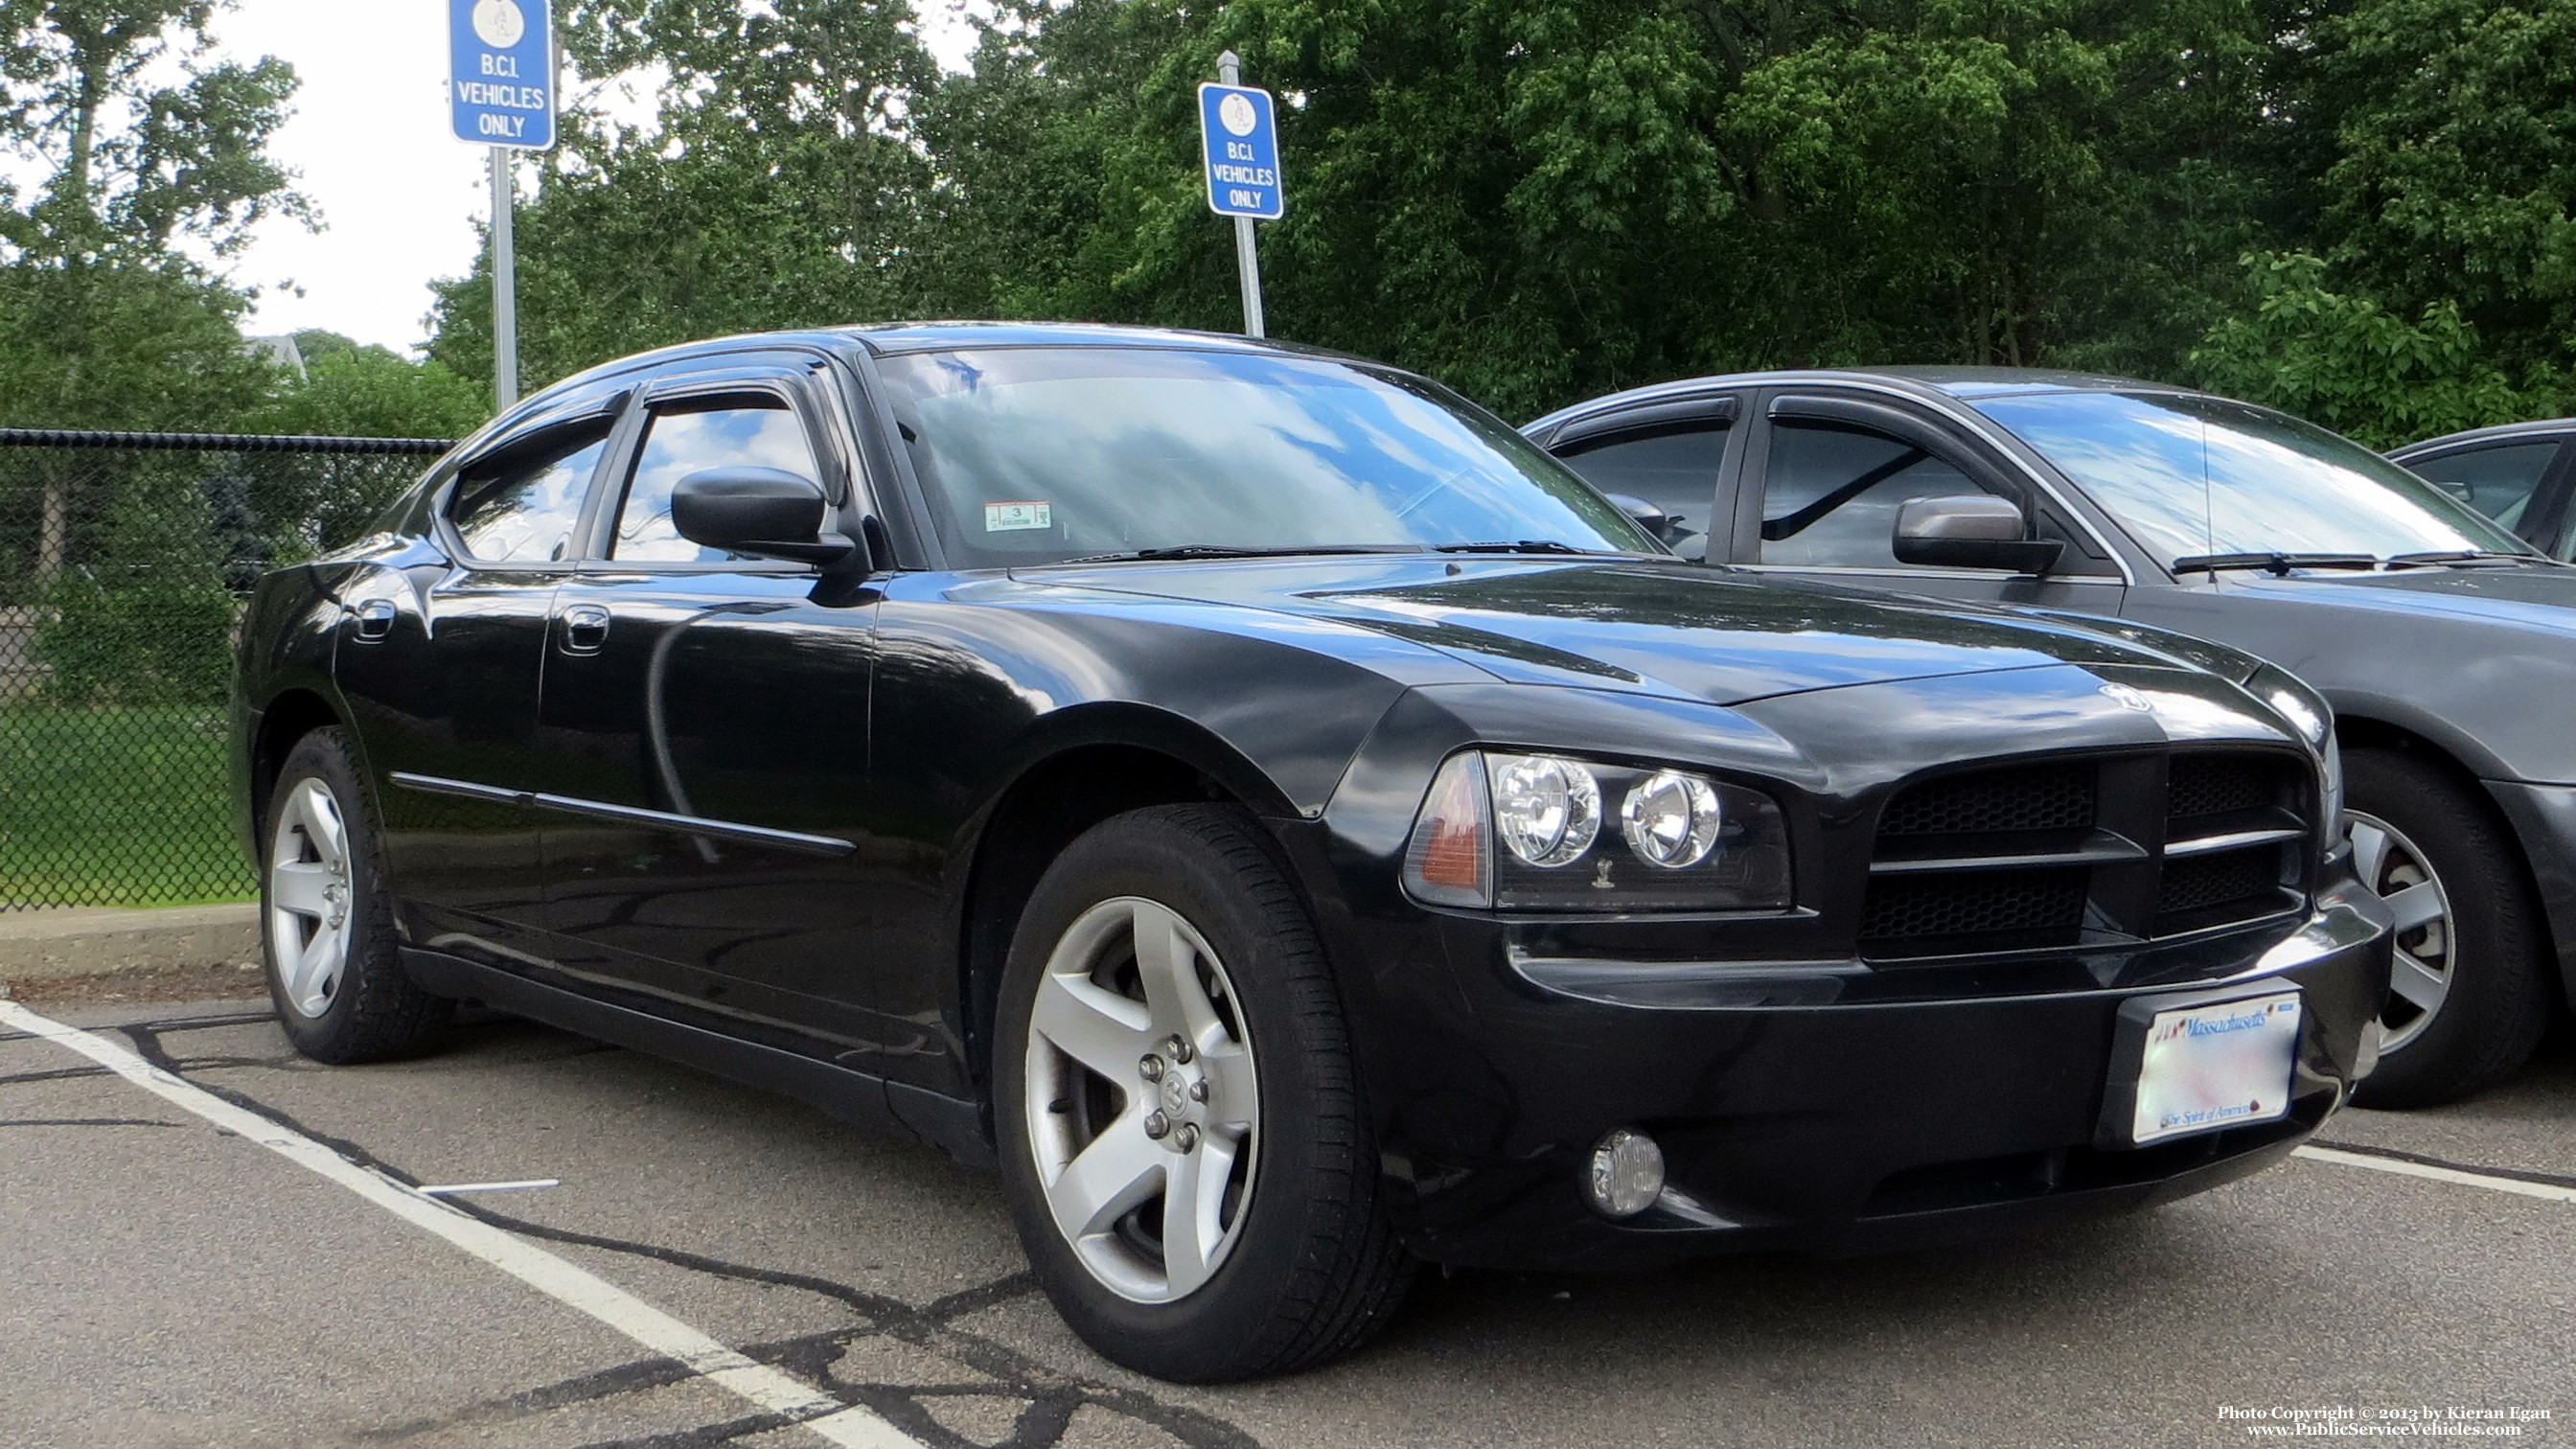 A photo  of Norwood Police
            Unmarked Unit, a 2006-2010 Dodge Charger             taken by Kieran Egan